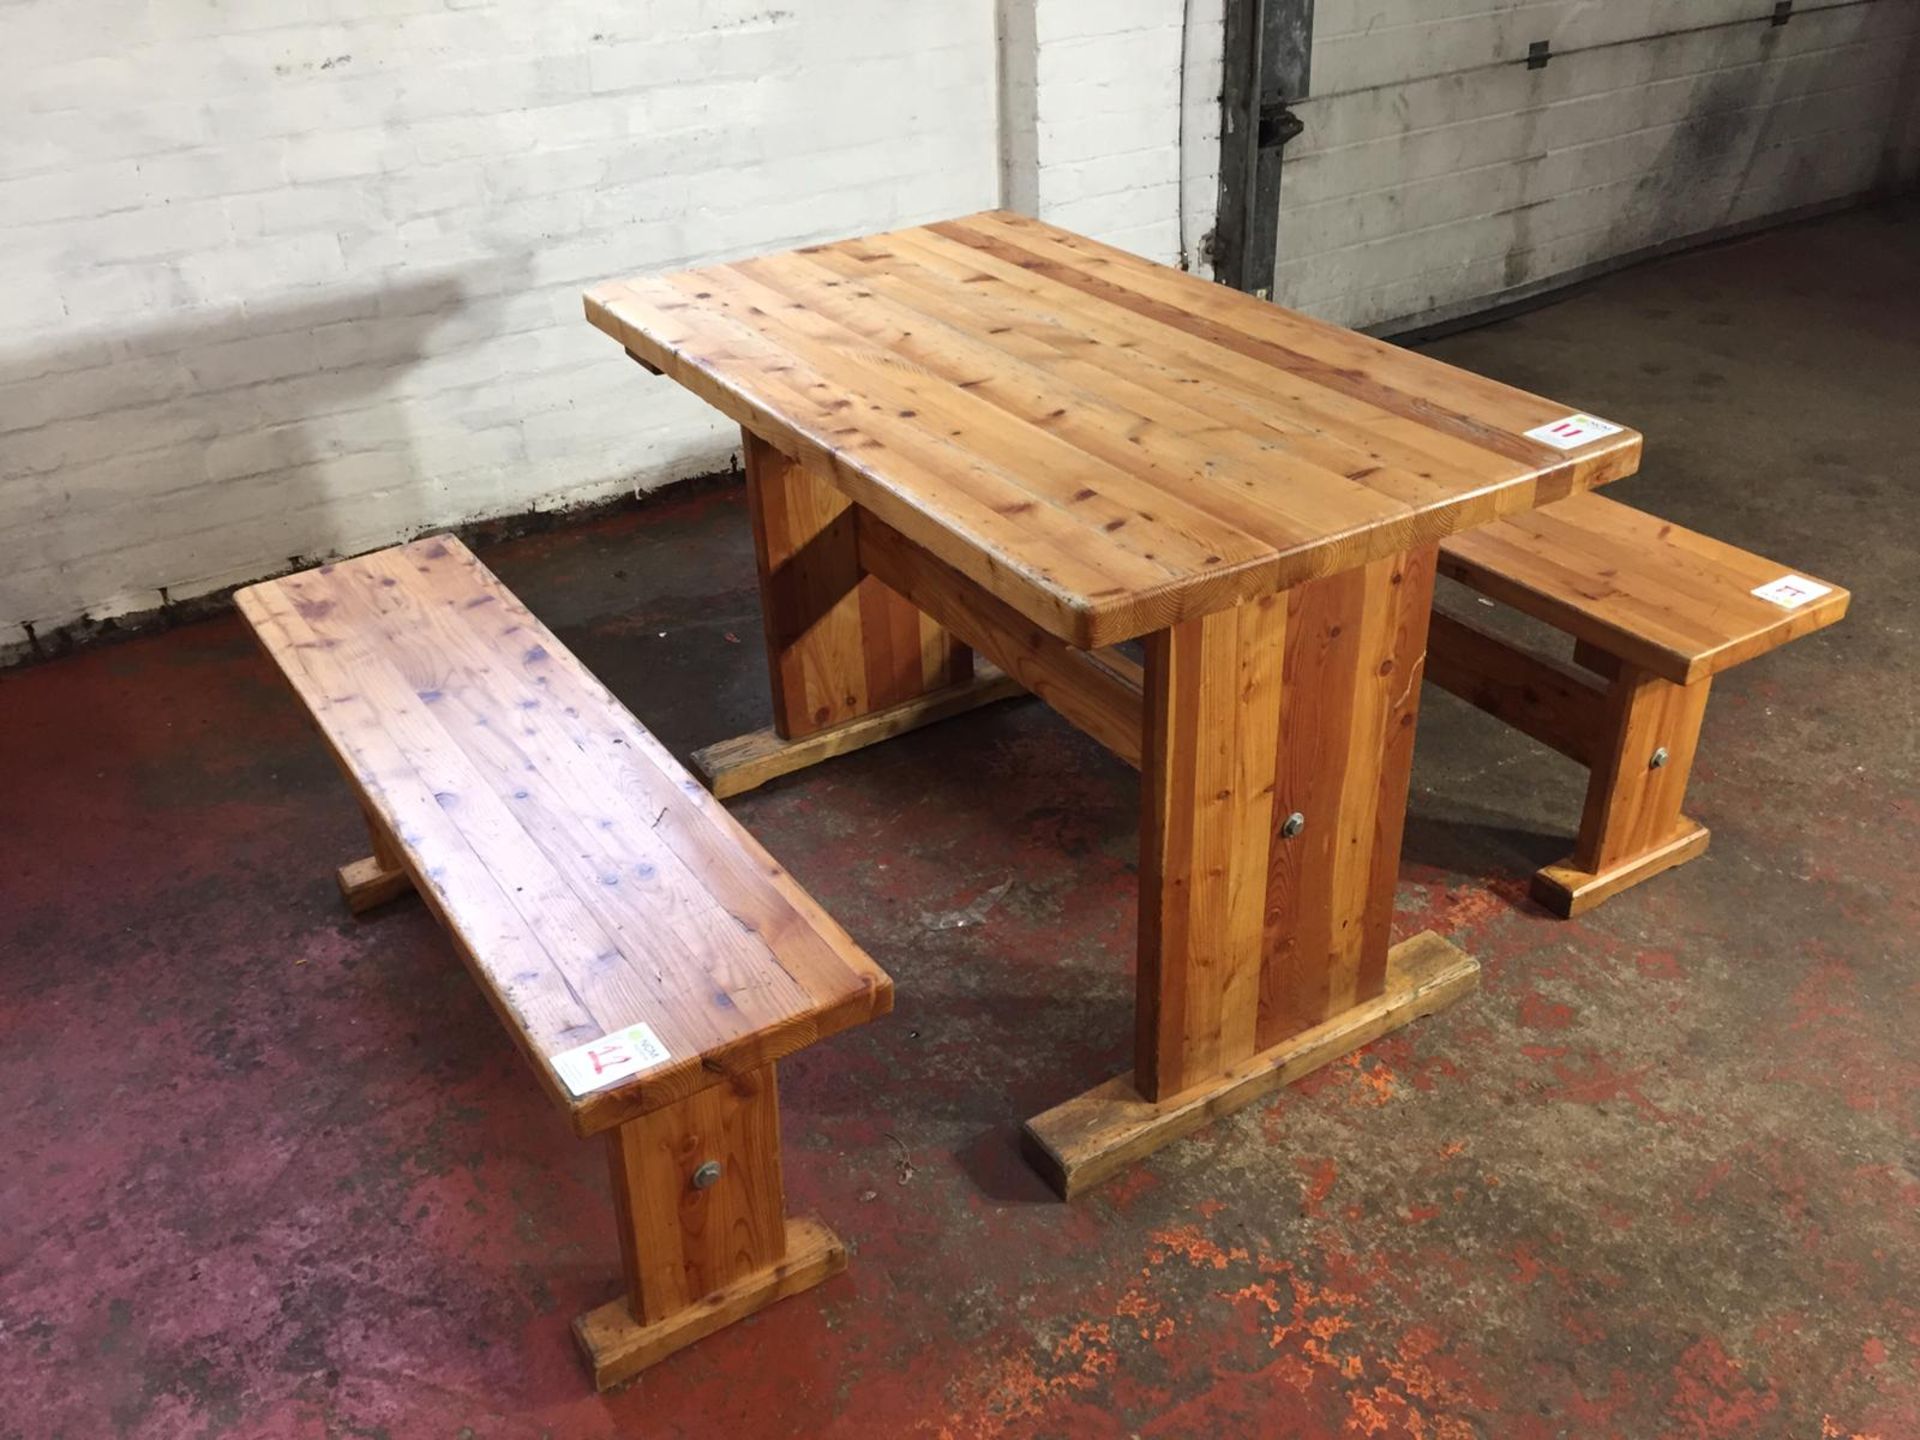 Pine Wooden Table with 2 Benches - Image 2 of 3